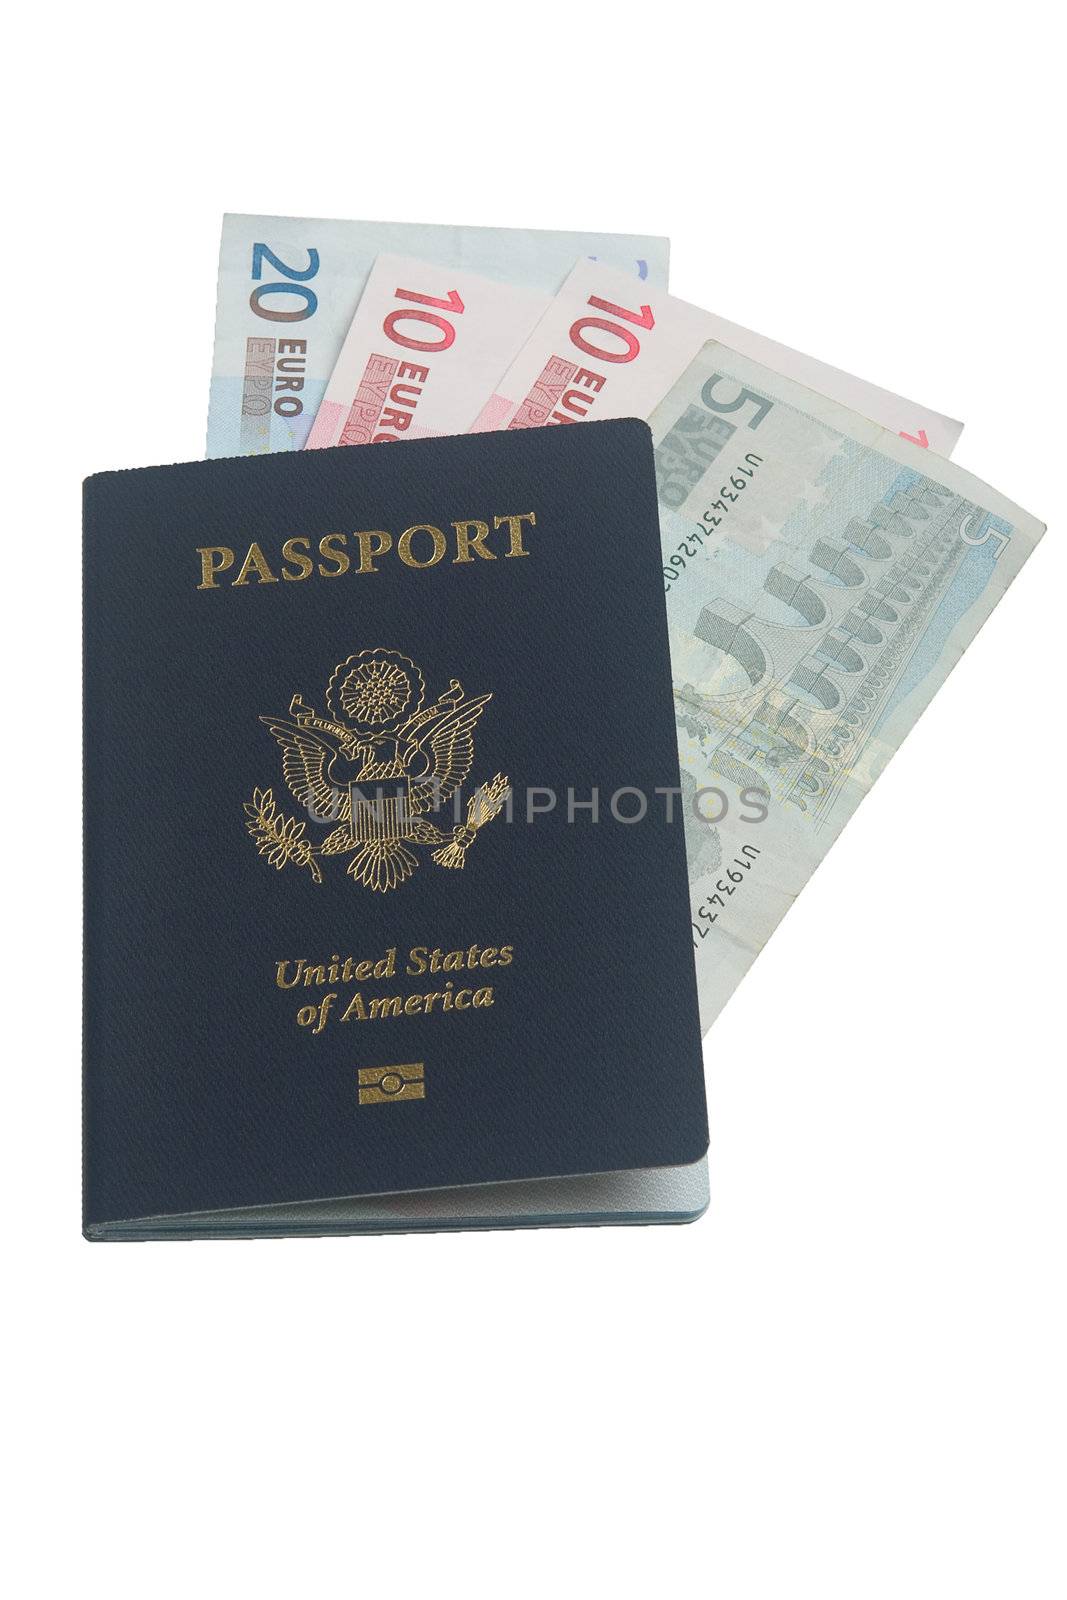 US passport with euros by PPphoto